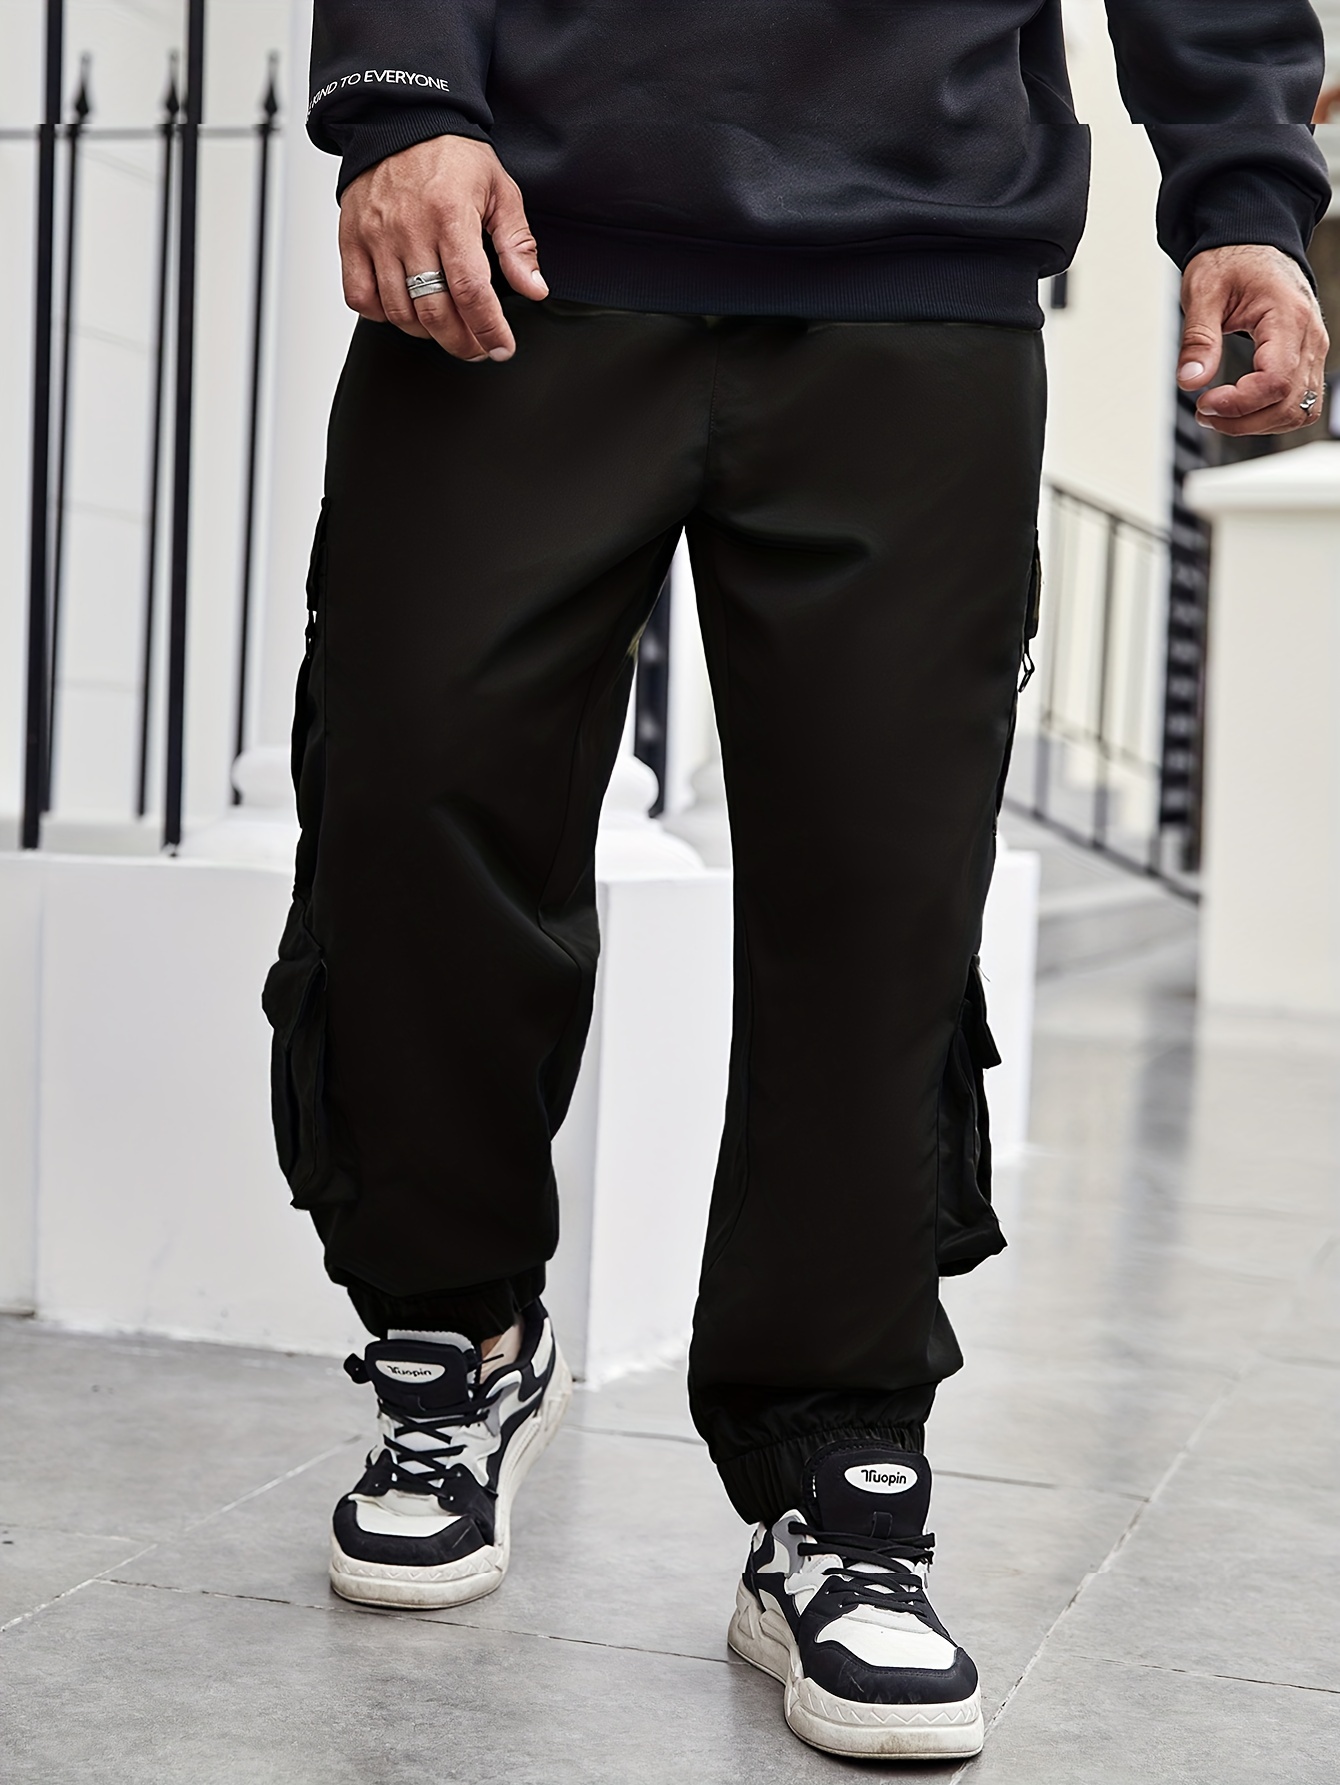 Plus Size Men's Solid Cargo Pants Oversized Fashion Street Style Pants With  Pockets For Spring Fall, Men's Clothing